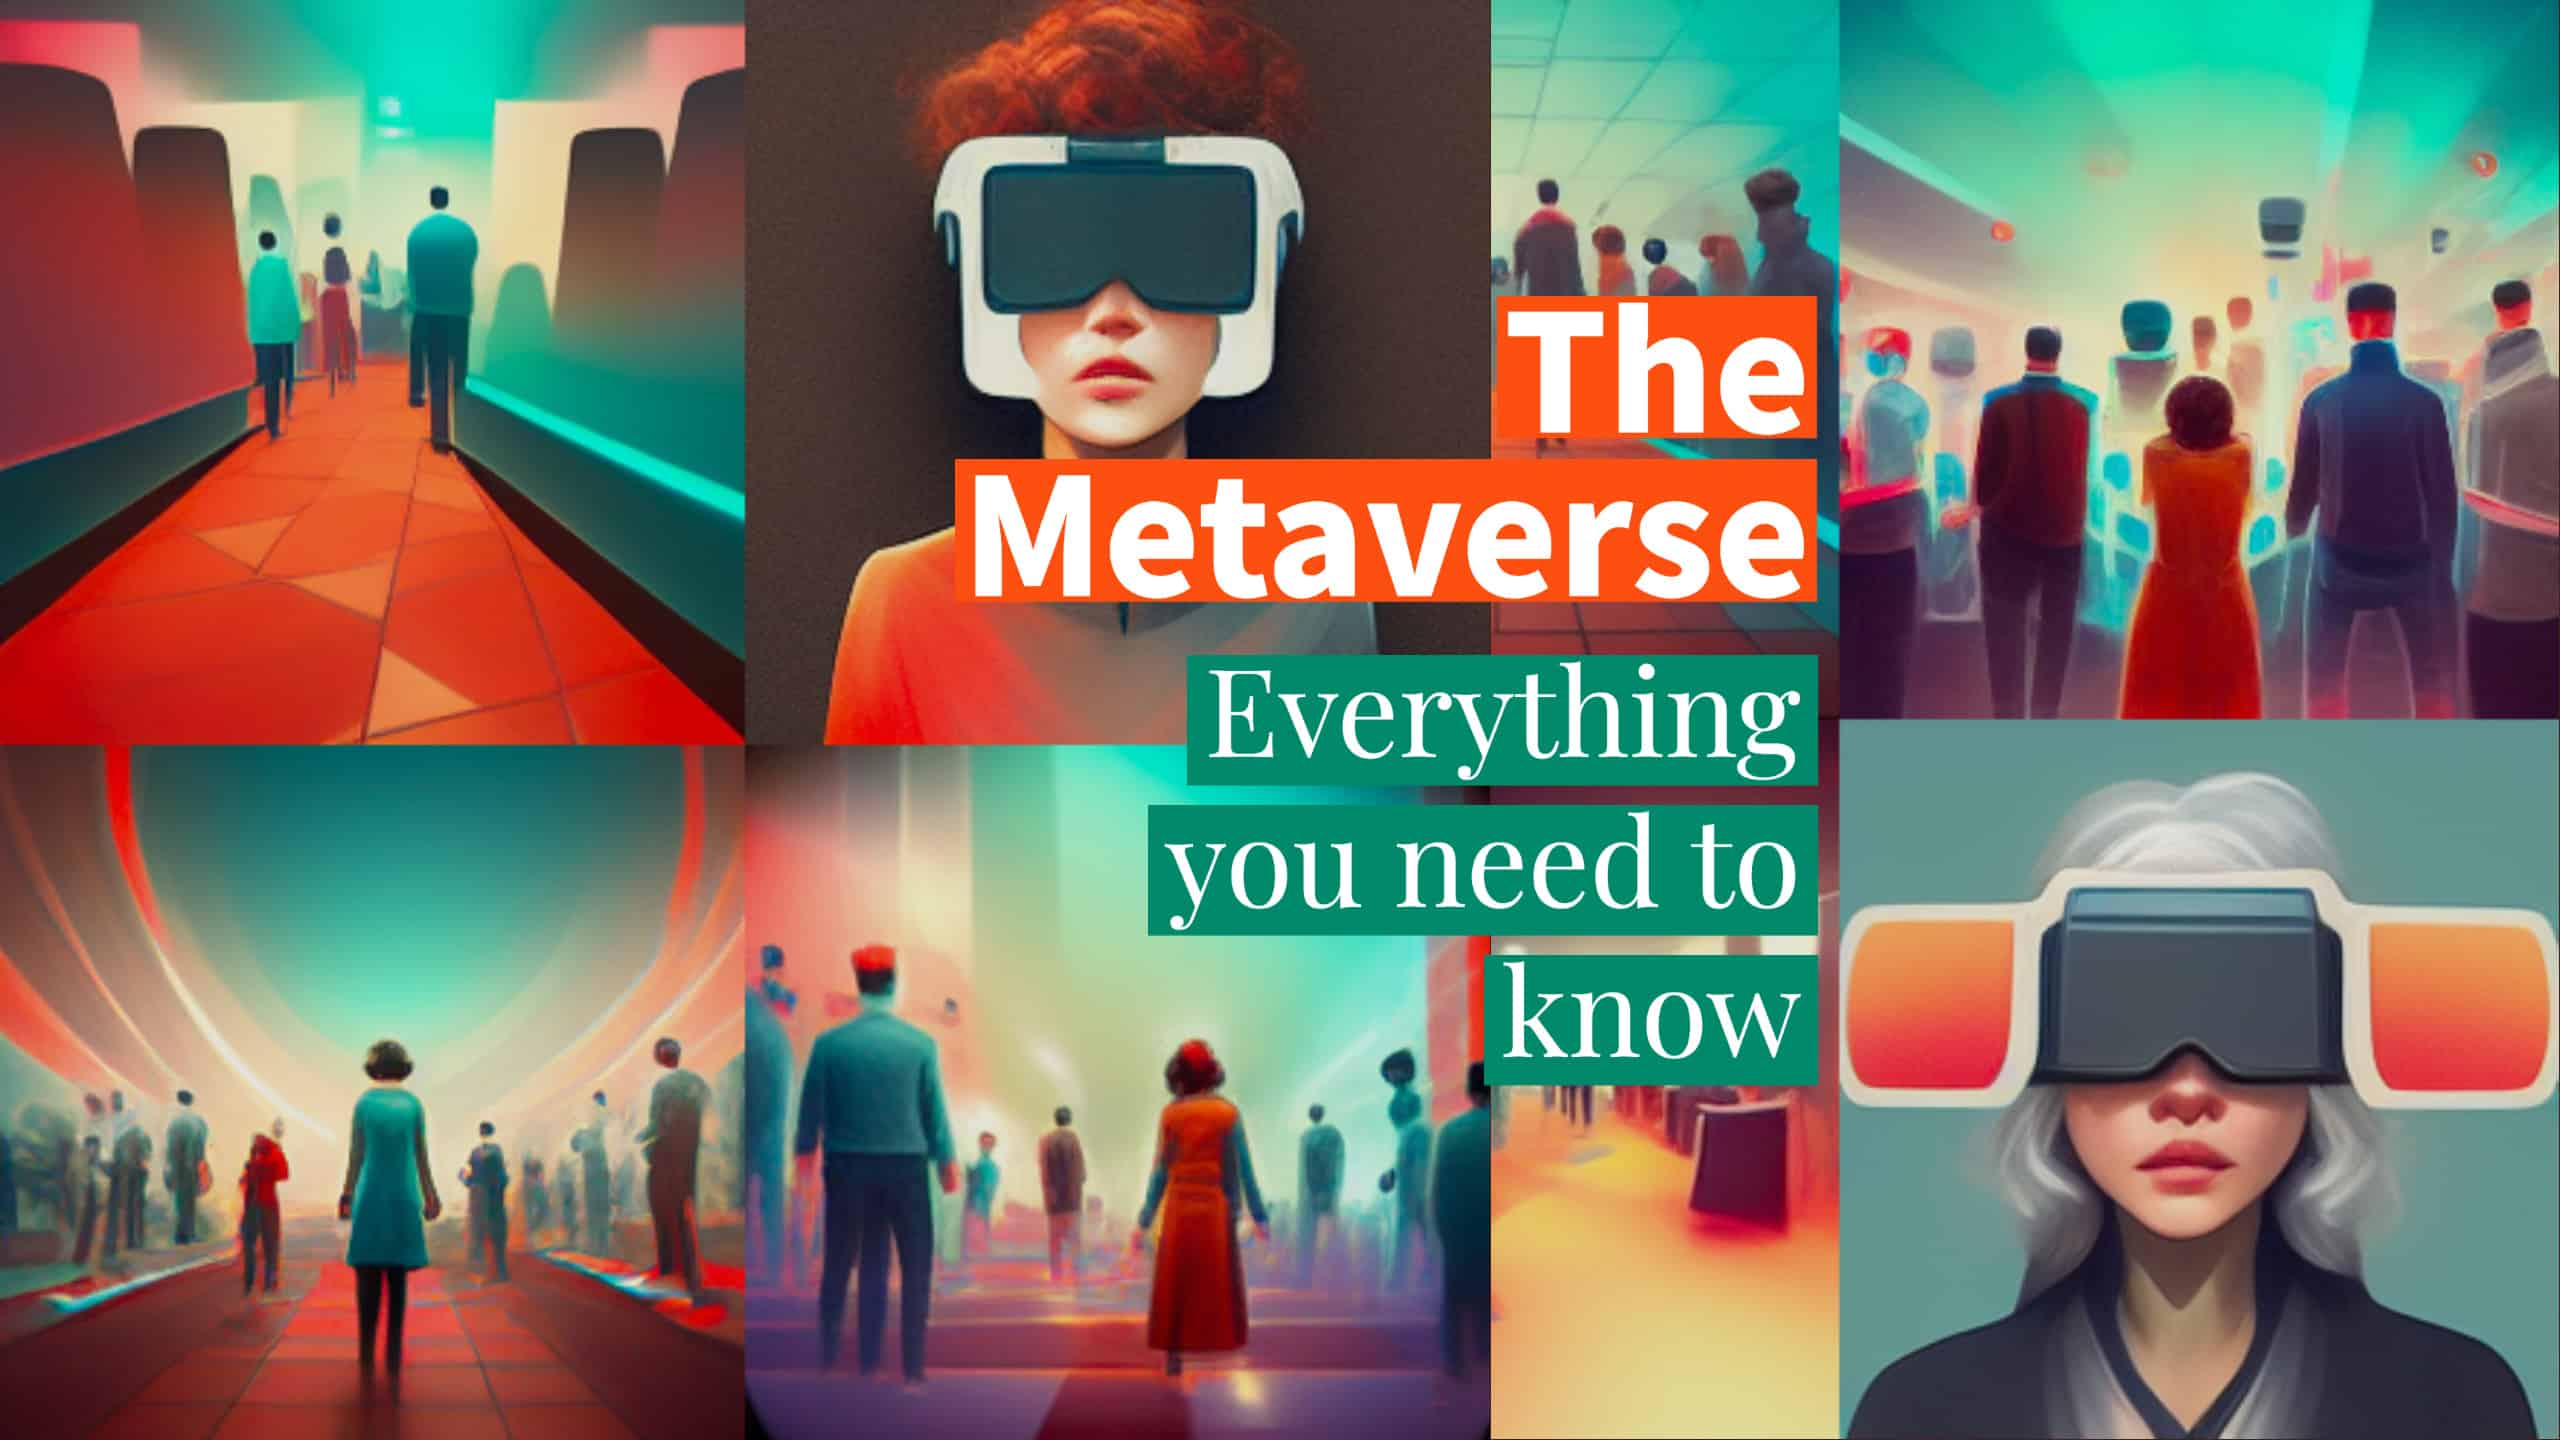 The Metaverse explained: Everything you need to know